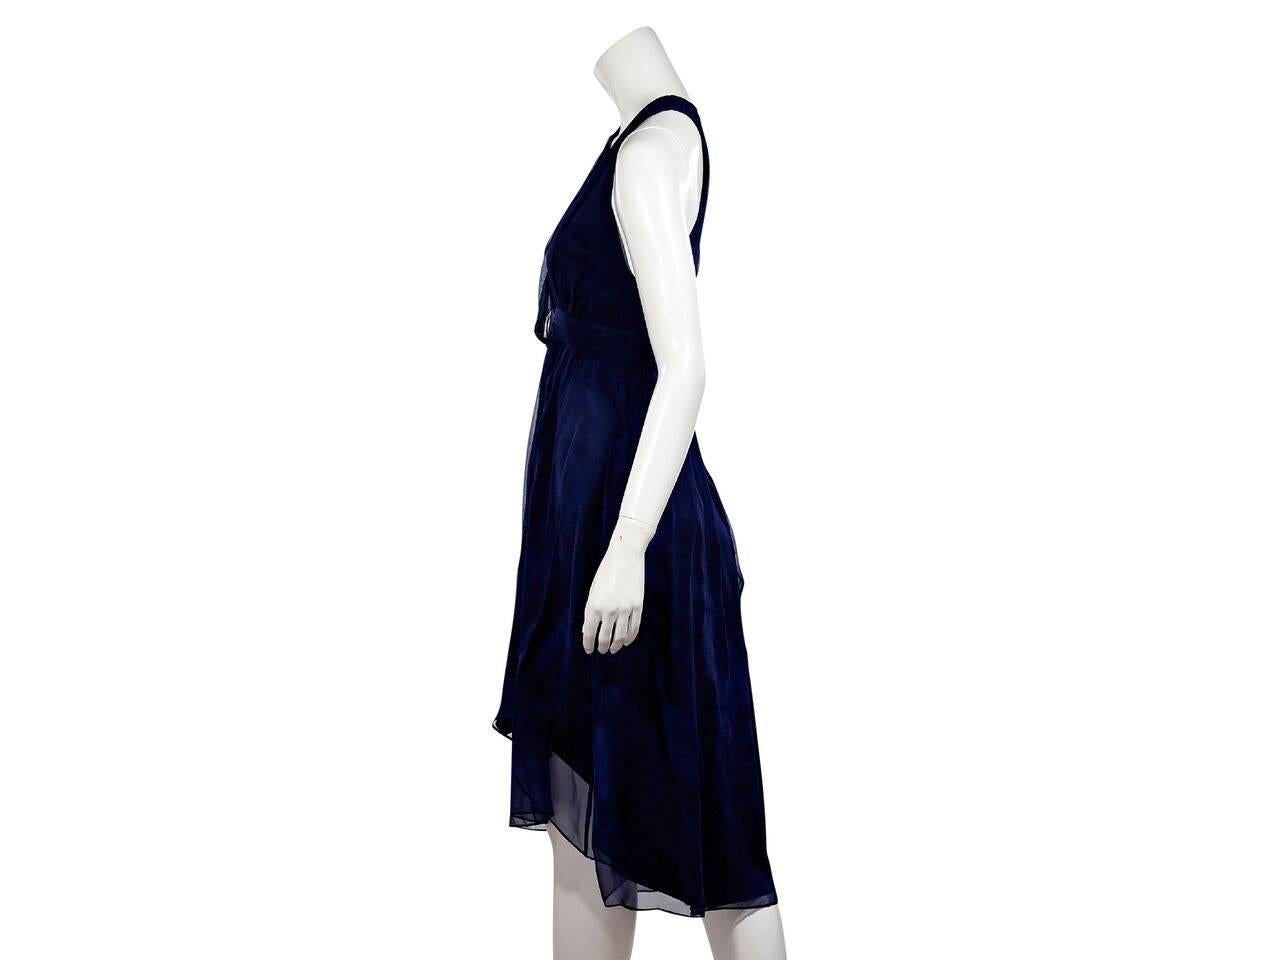 Product details:  Dark blue printed silk dress by Haute Hippie.  Plunging v-neck.  Sleeveless.  Asymmetrical crisscross back straps.  Concealed back zip closure.  Hi-lo hem.
Condition: Pre-owned. New with tags.
Est. Retail $ 795.00